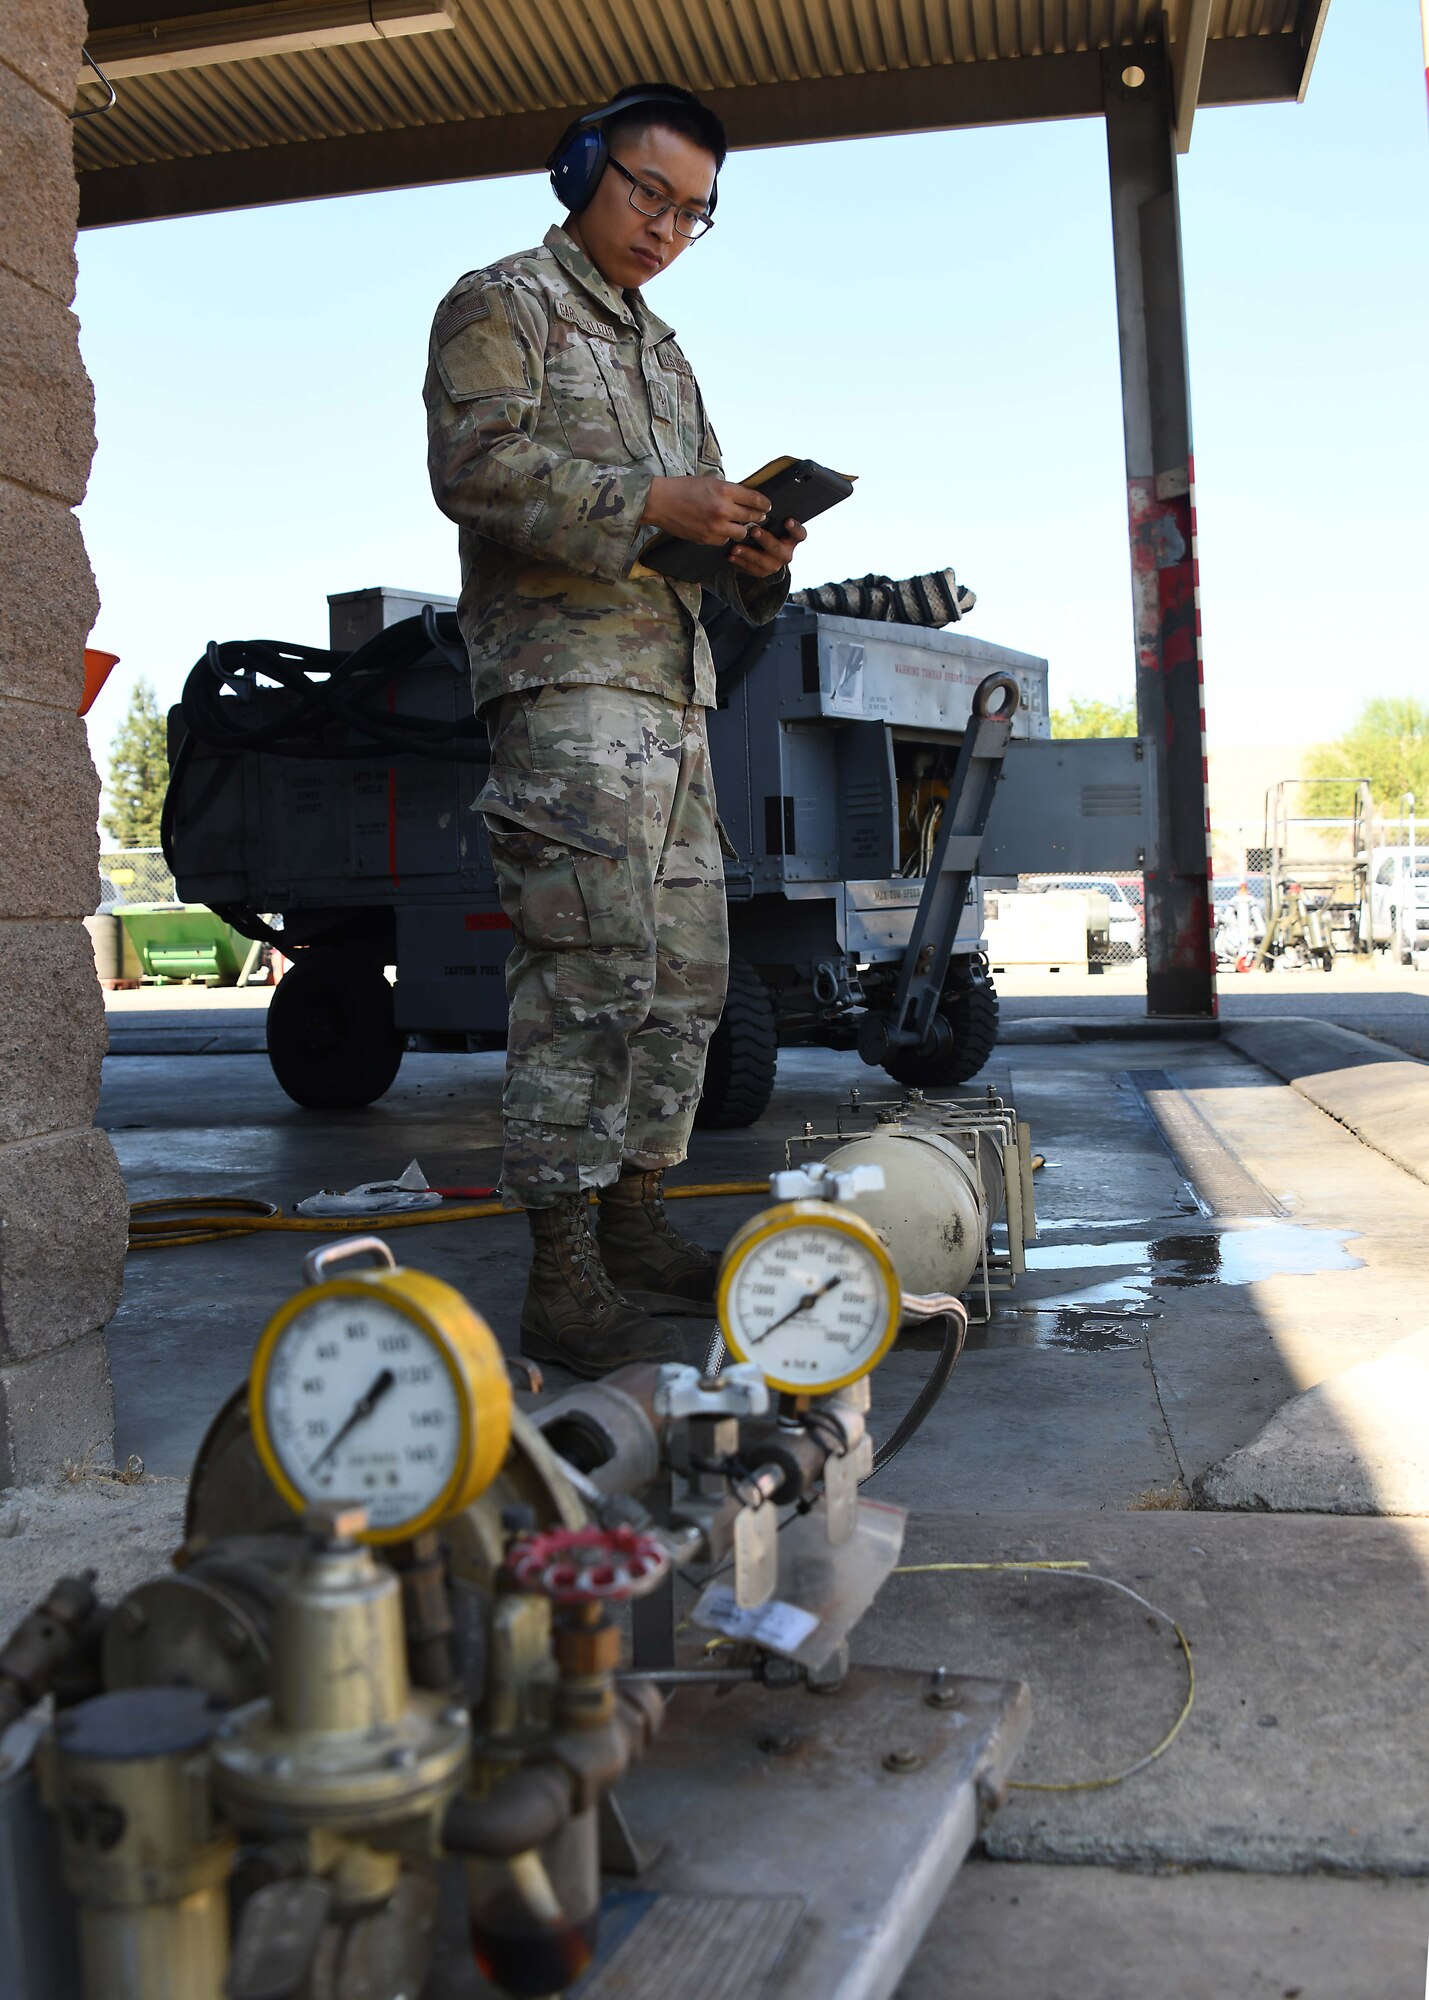 A  US service member wearing green camo reviews instructions behind two pressure gauges in the foreground.